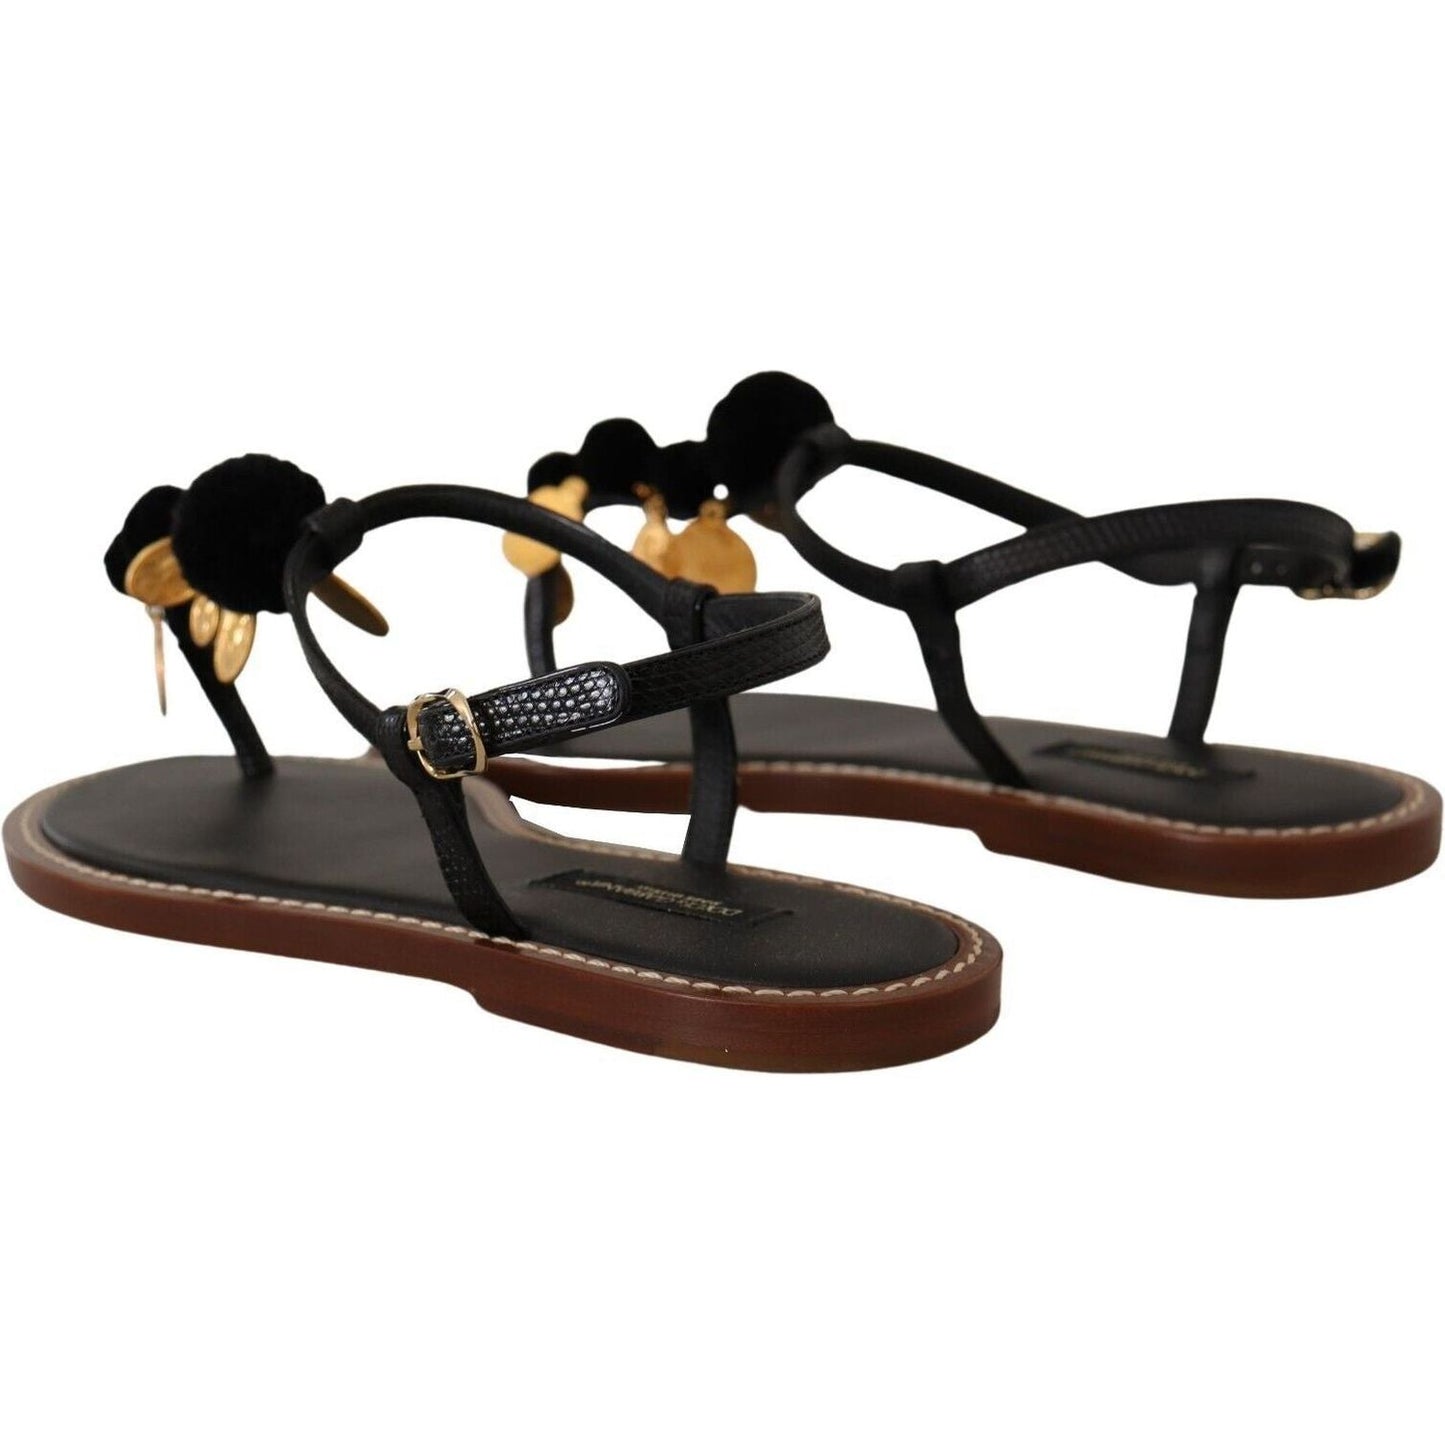 Dolce & Gabbana Chic Leather Ankle Strap Flats with Gold Detailing black-leather-coins-flip-flops-sandals-shoes-1